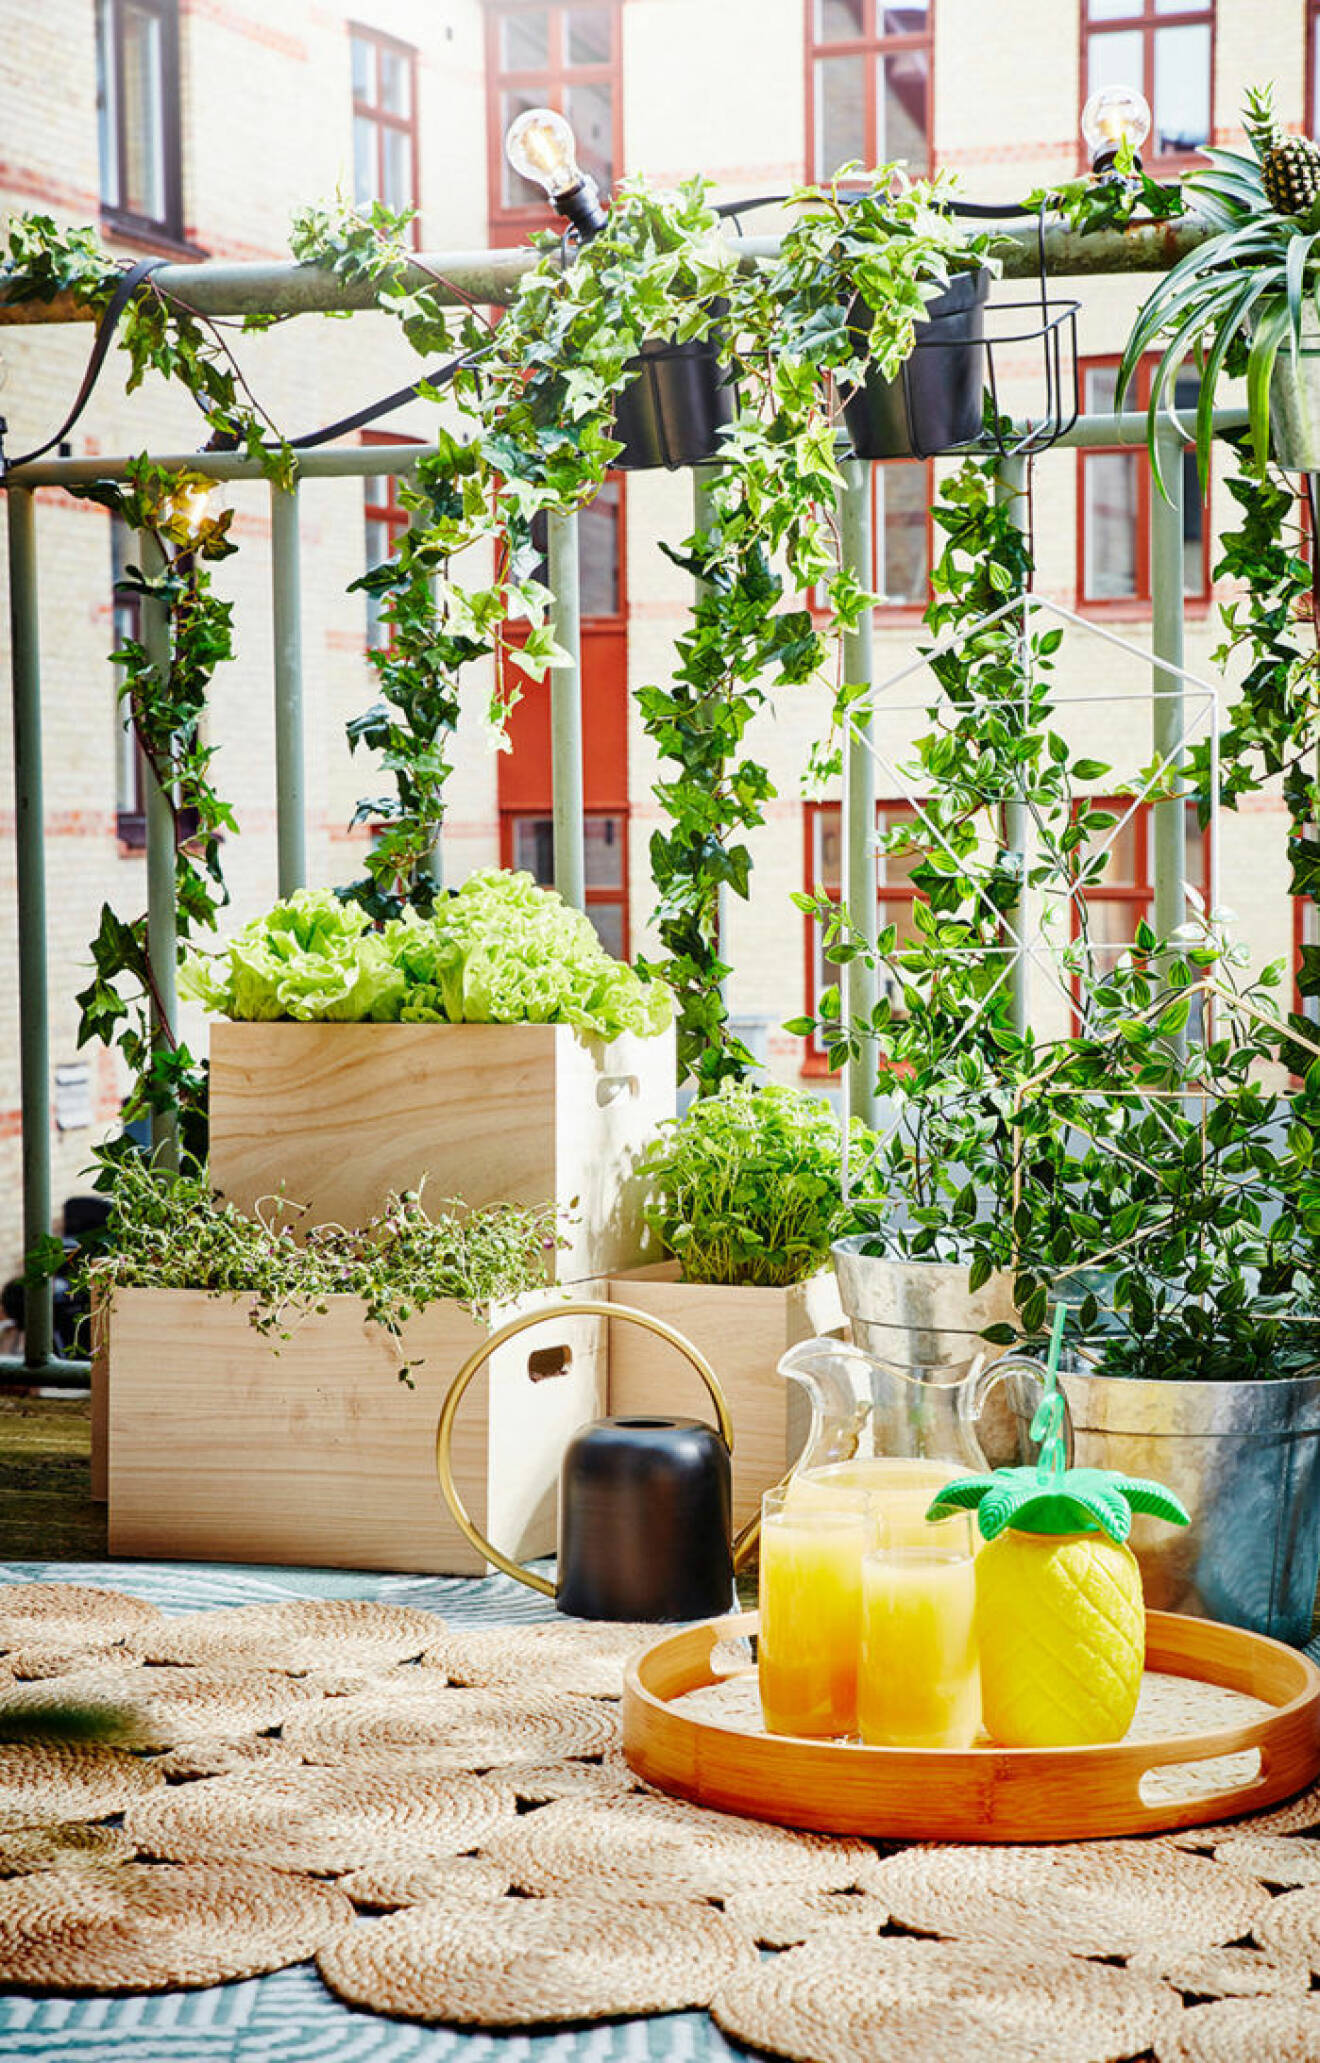 Summer balcony with rug, plants, herbs, vegetables and string lights.